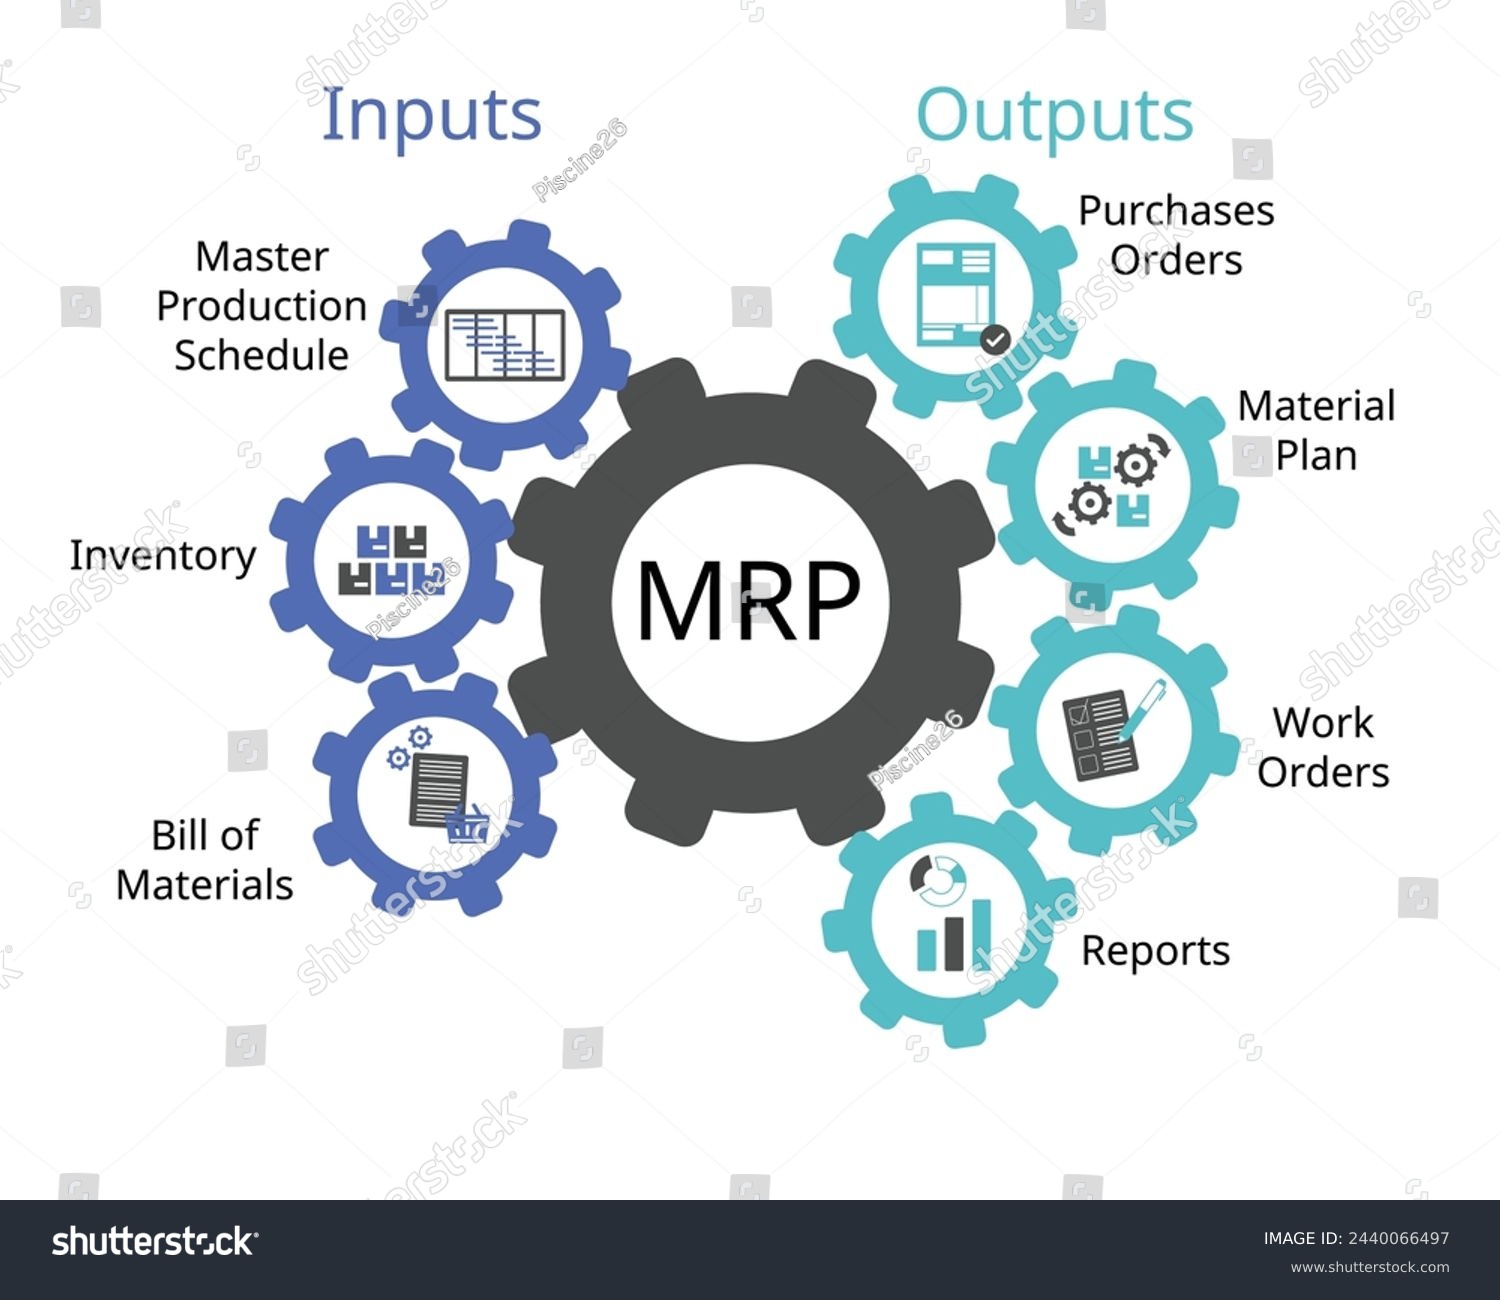 MRP or Material Requirements Planning system of input for master production schedule, inventory, bill of materials and output of purchased order, material plan, work orders, reports #2440066497